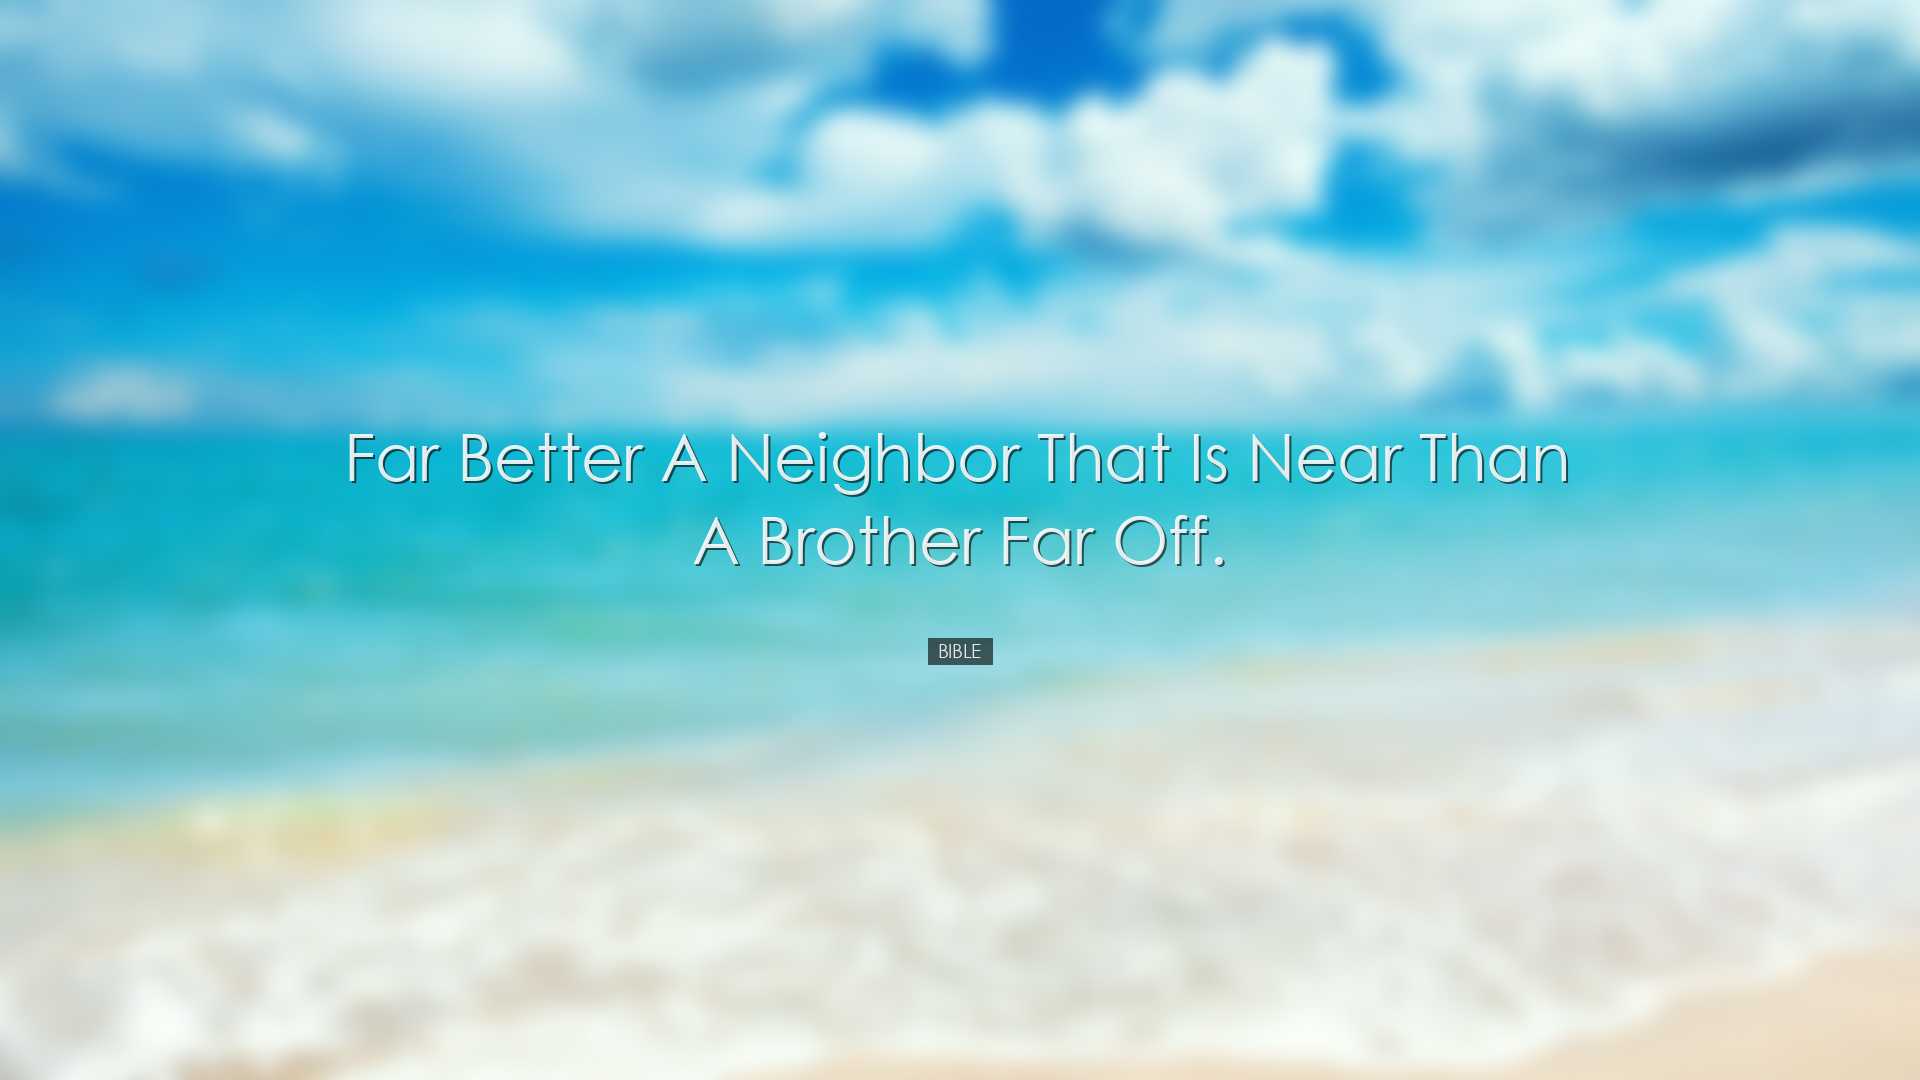 Far better a neighbor that is near than a brother far off. - Bible